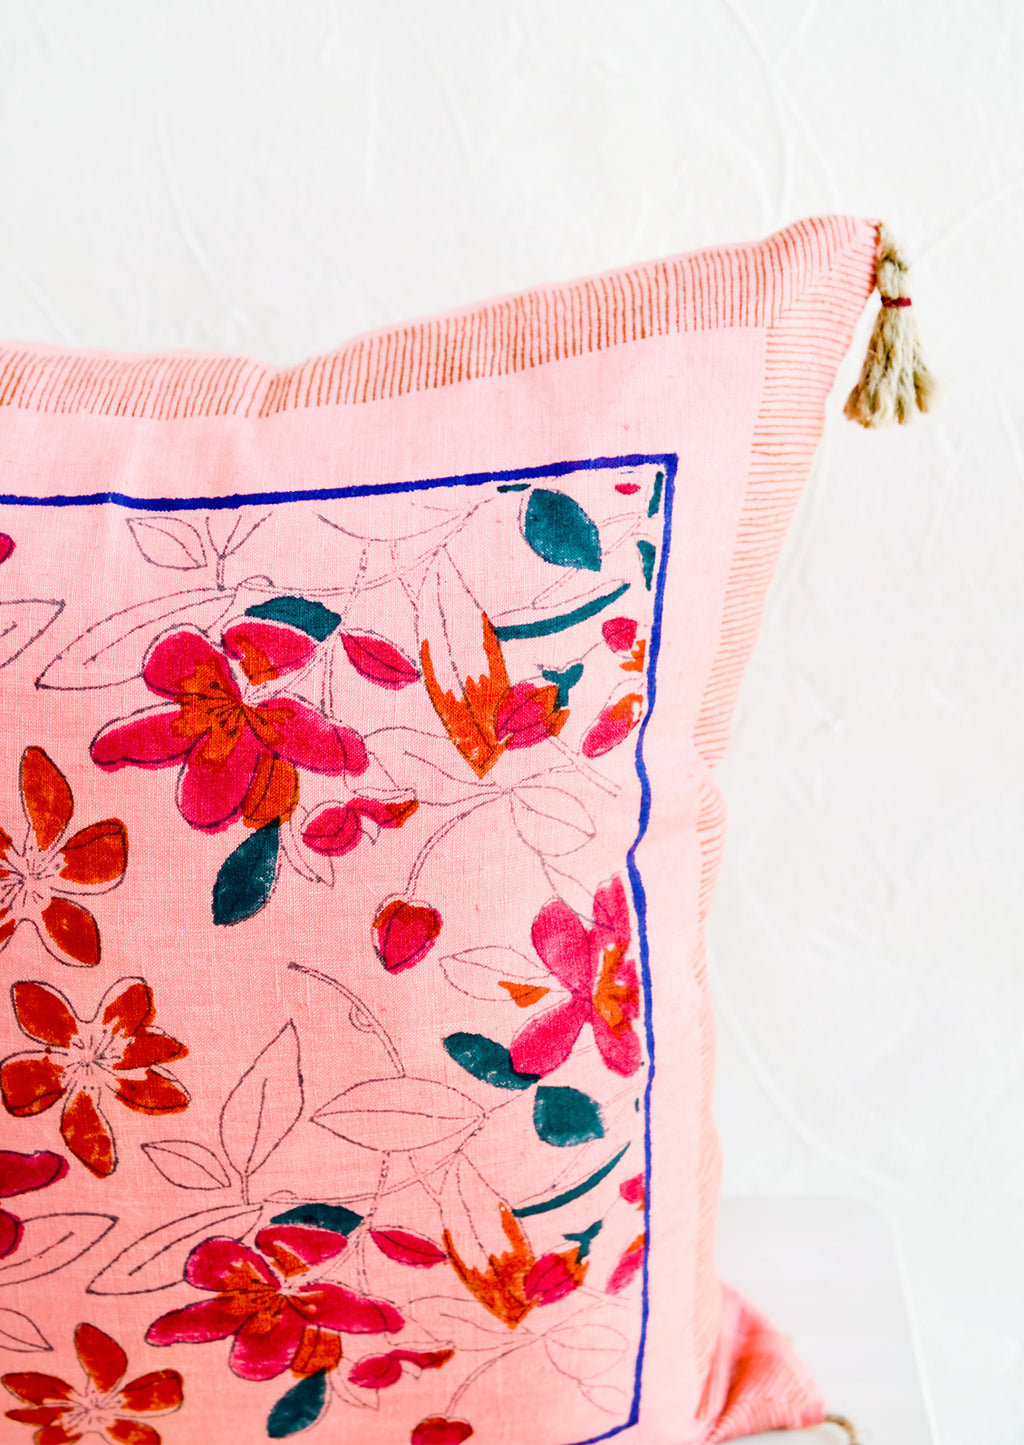 3: An intricate block printed floral pattern on a linen pillow.